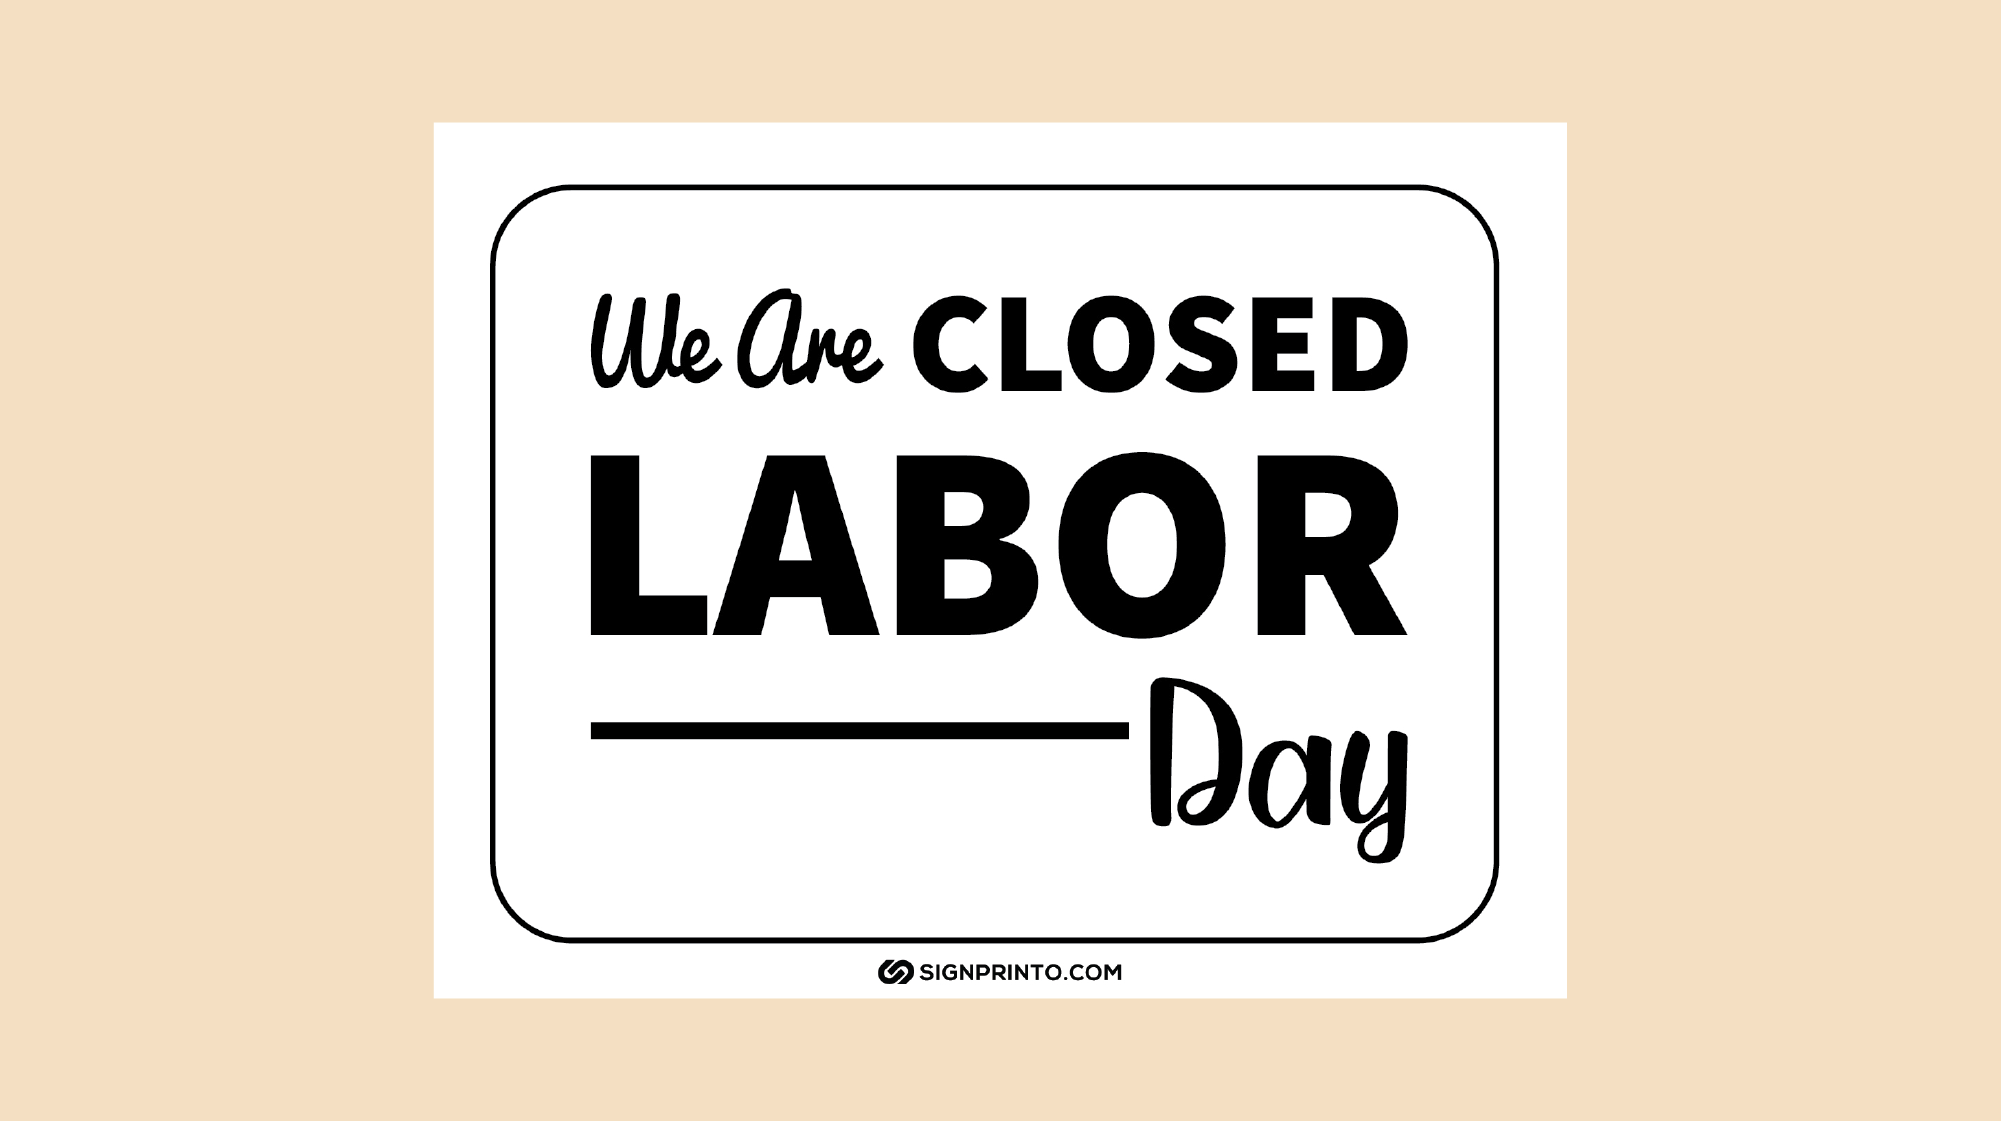 we are closed labor day - Labor Day closed sign